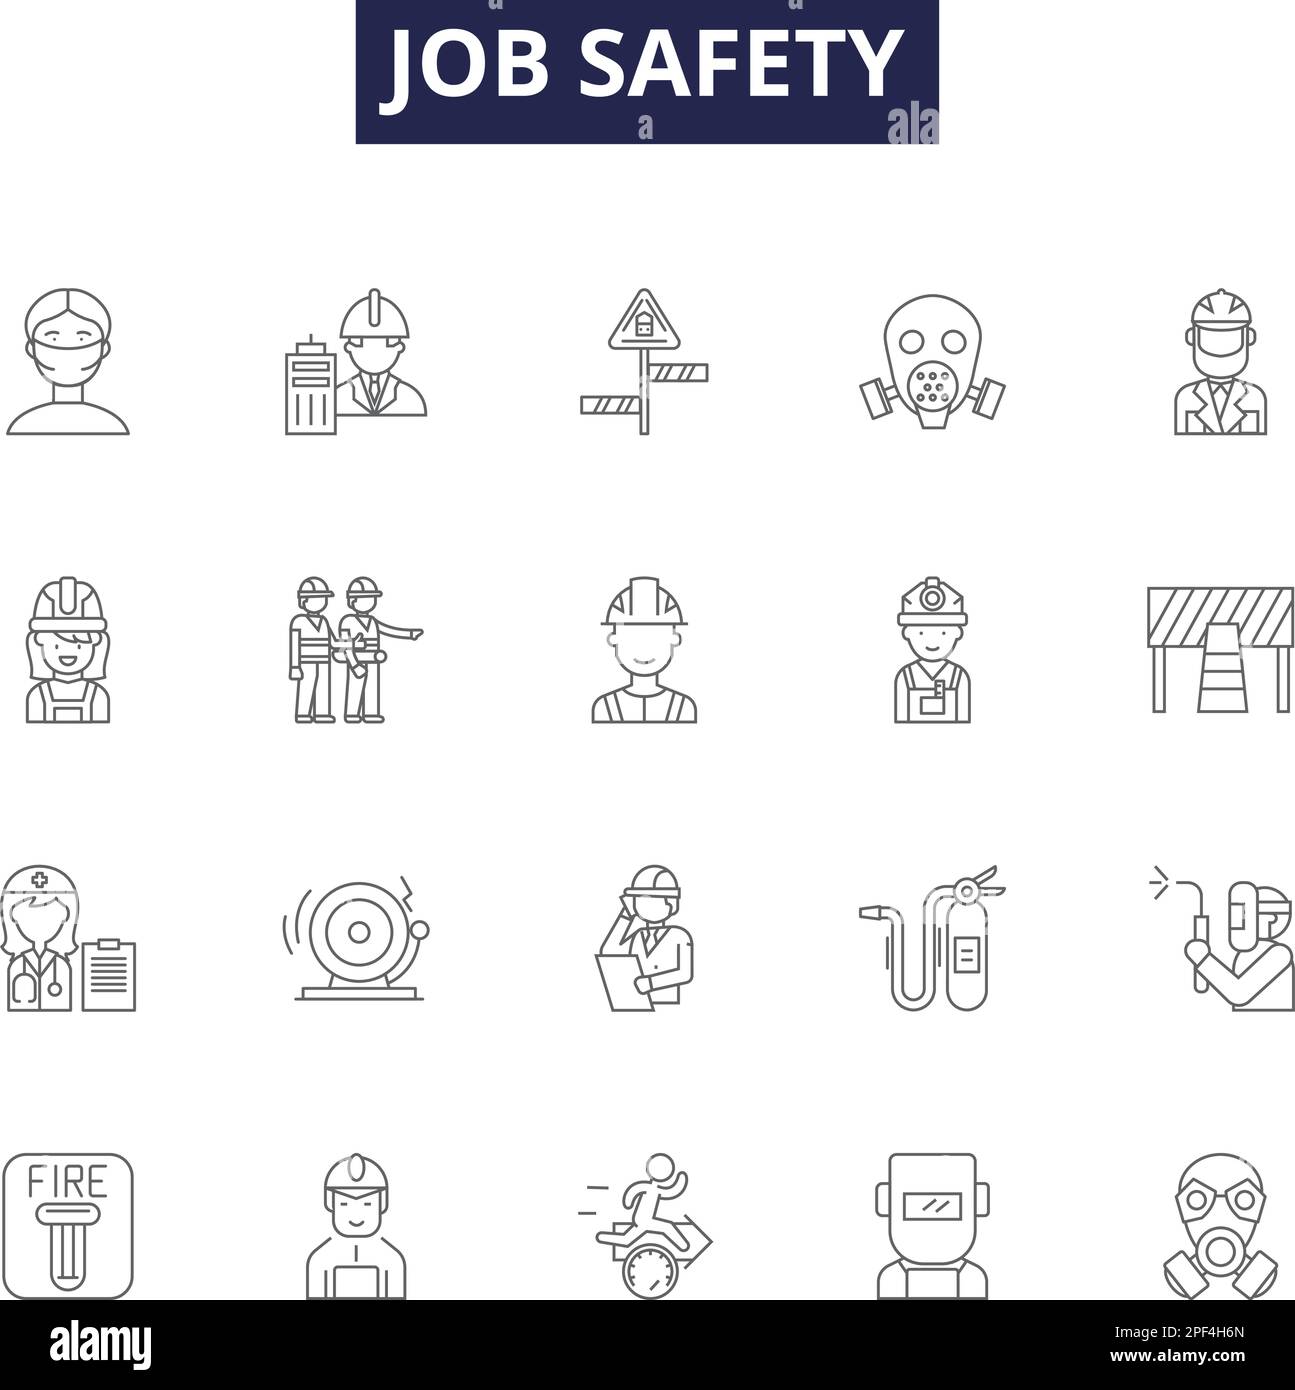 Job safety line vector icons and signs. Avoidance, Awareness, Prevention, Training, Gear, Hazard, Hygiene, Recordkeeping outline vector illustration Stock Vector